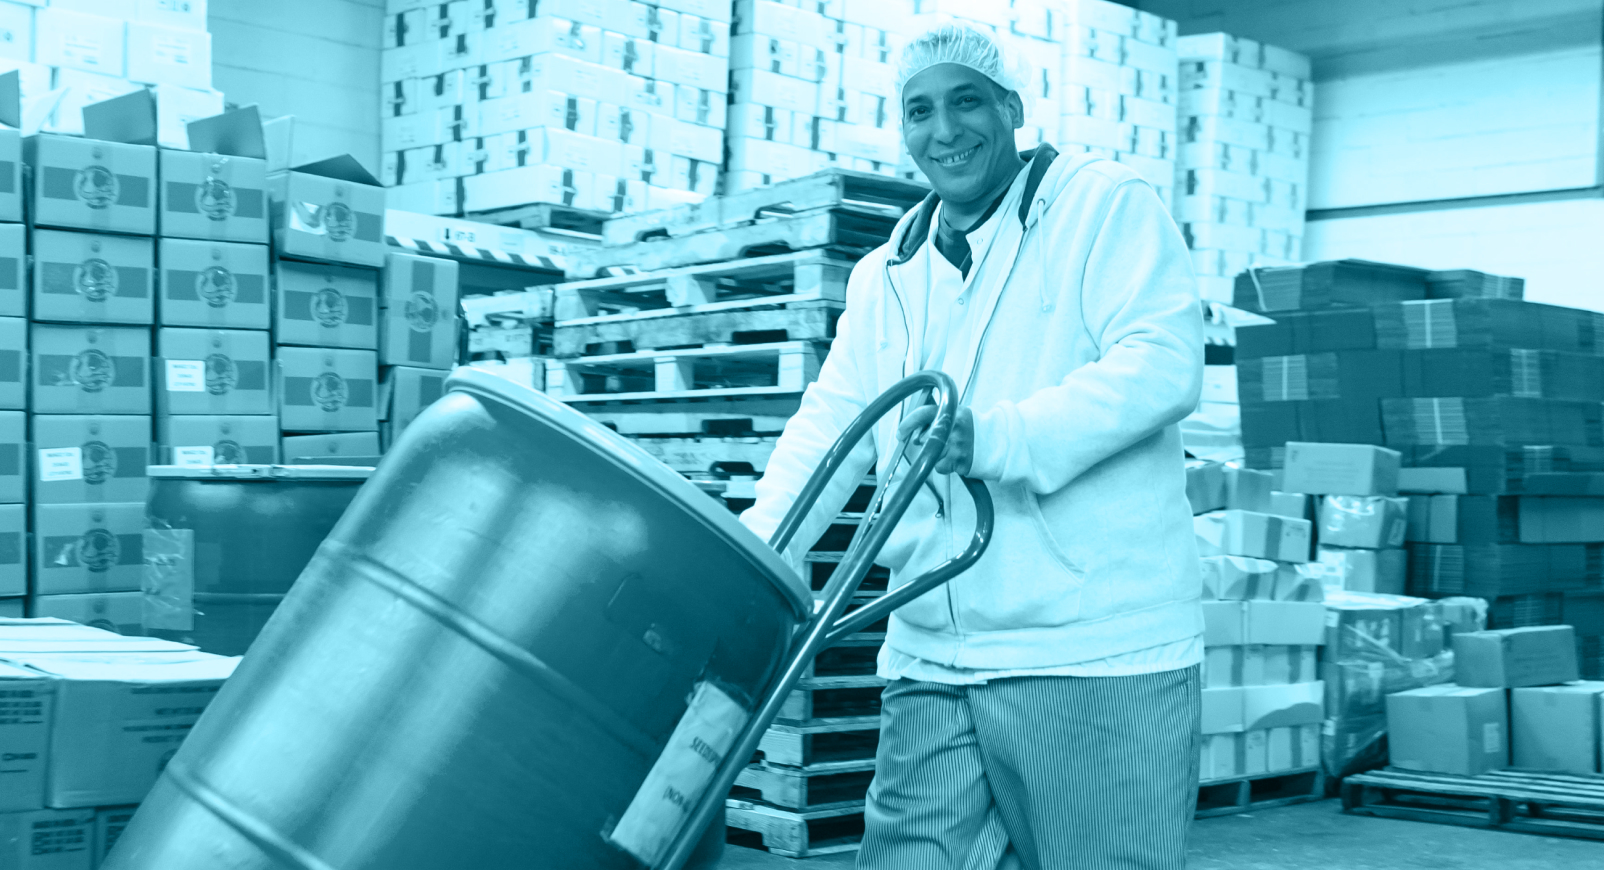 Man in a hair net transporting a barrel of food across a warehouse floor